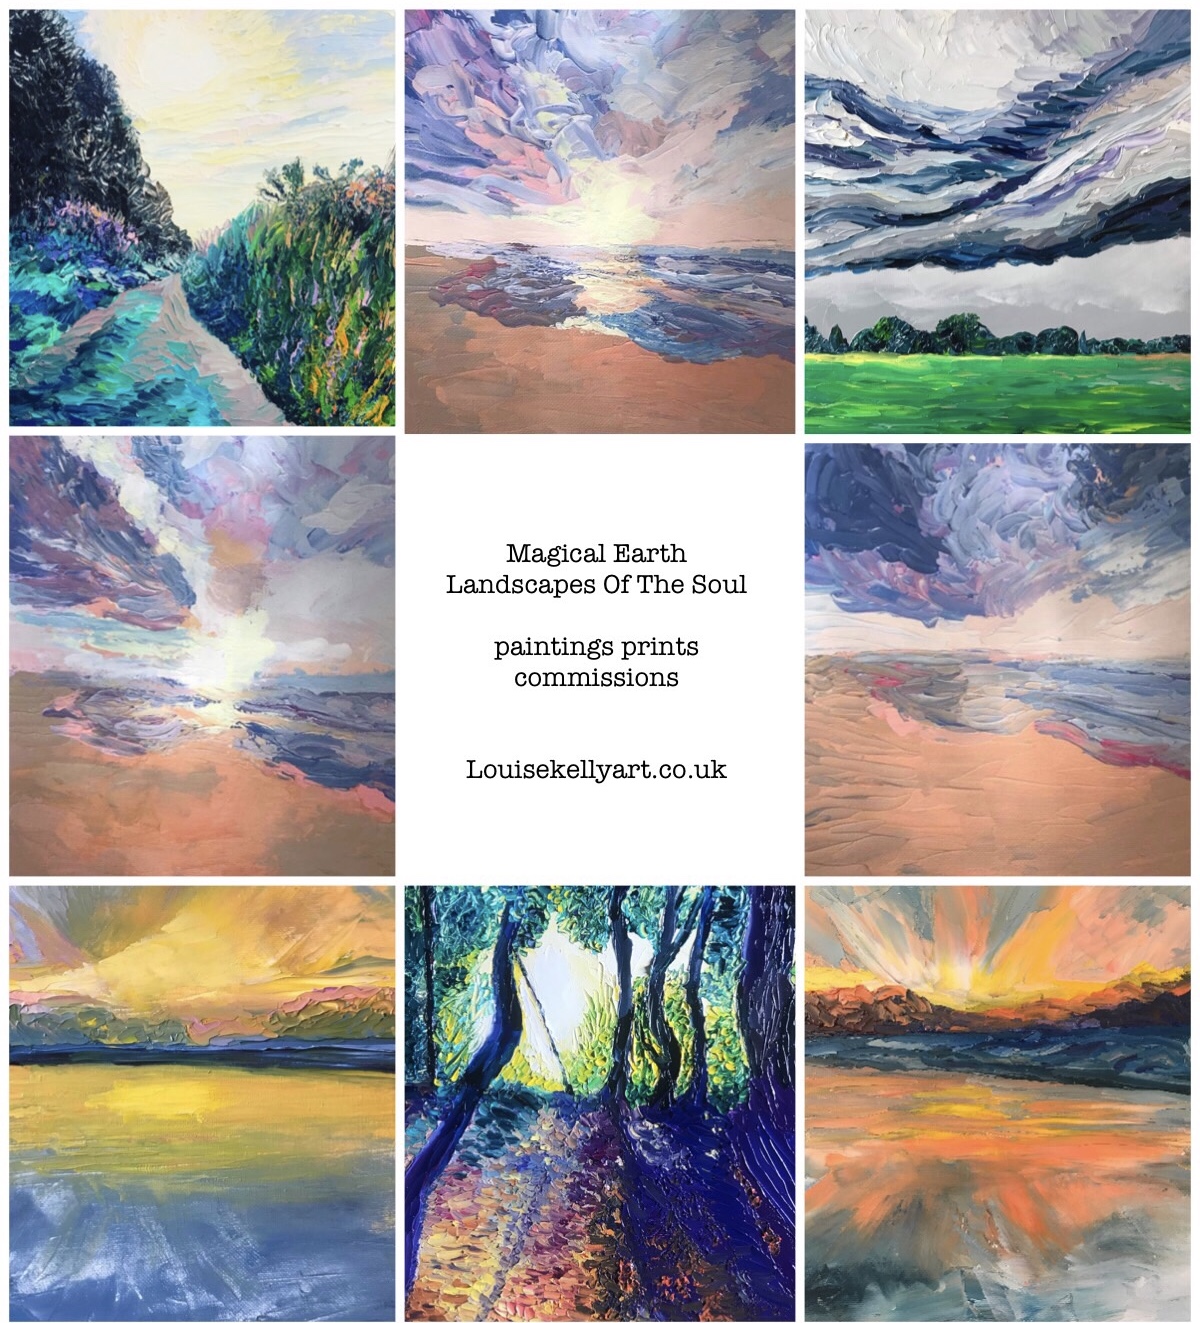 Gallery and Shop — louisekellyart